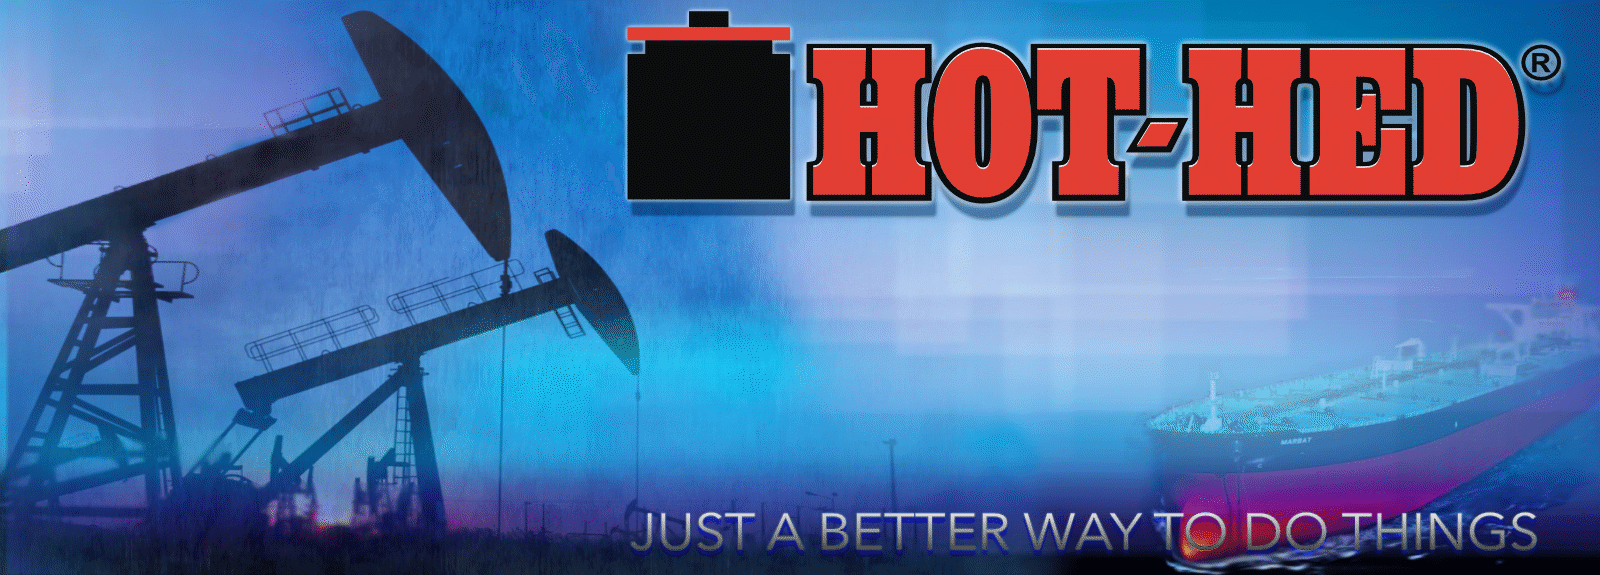 Hot Bolting Services & for removing corroded bolts & studs - Hot-Hed® International Oilfield Services & Equipment Rentals